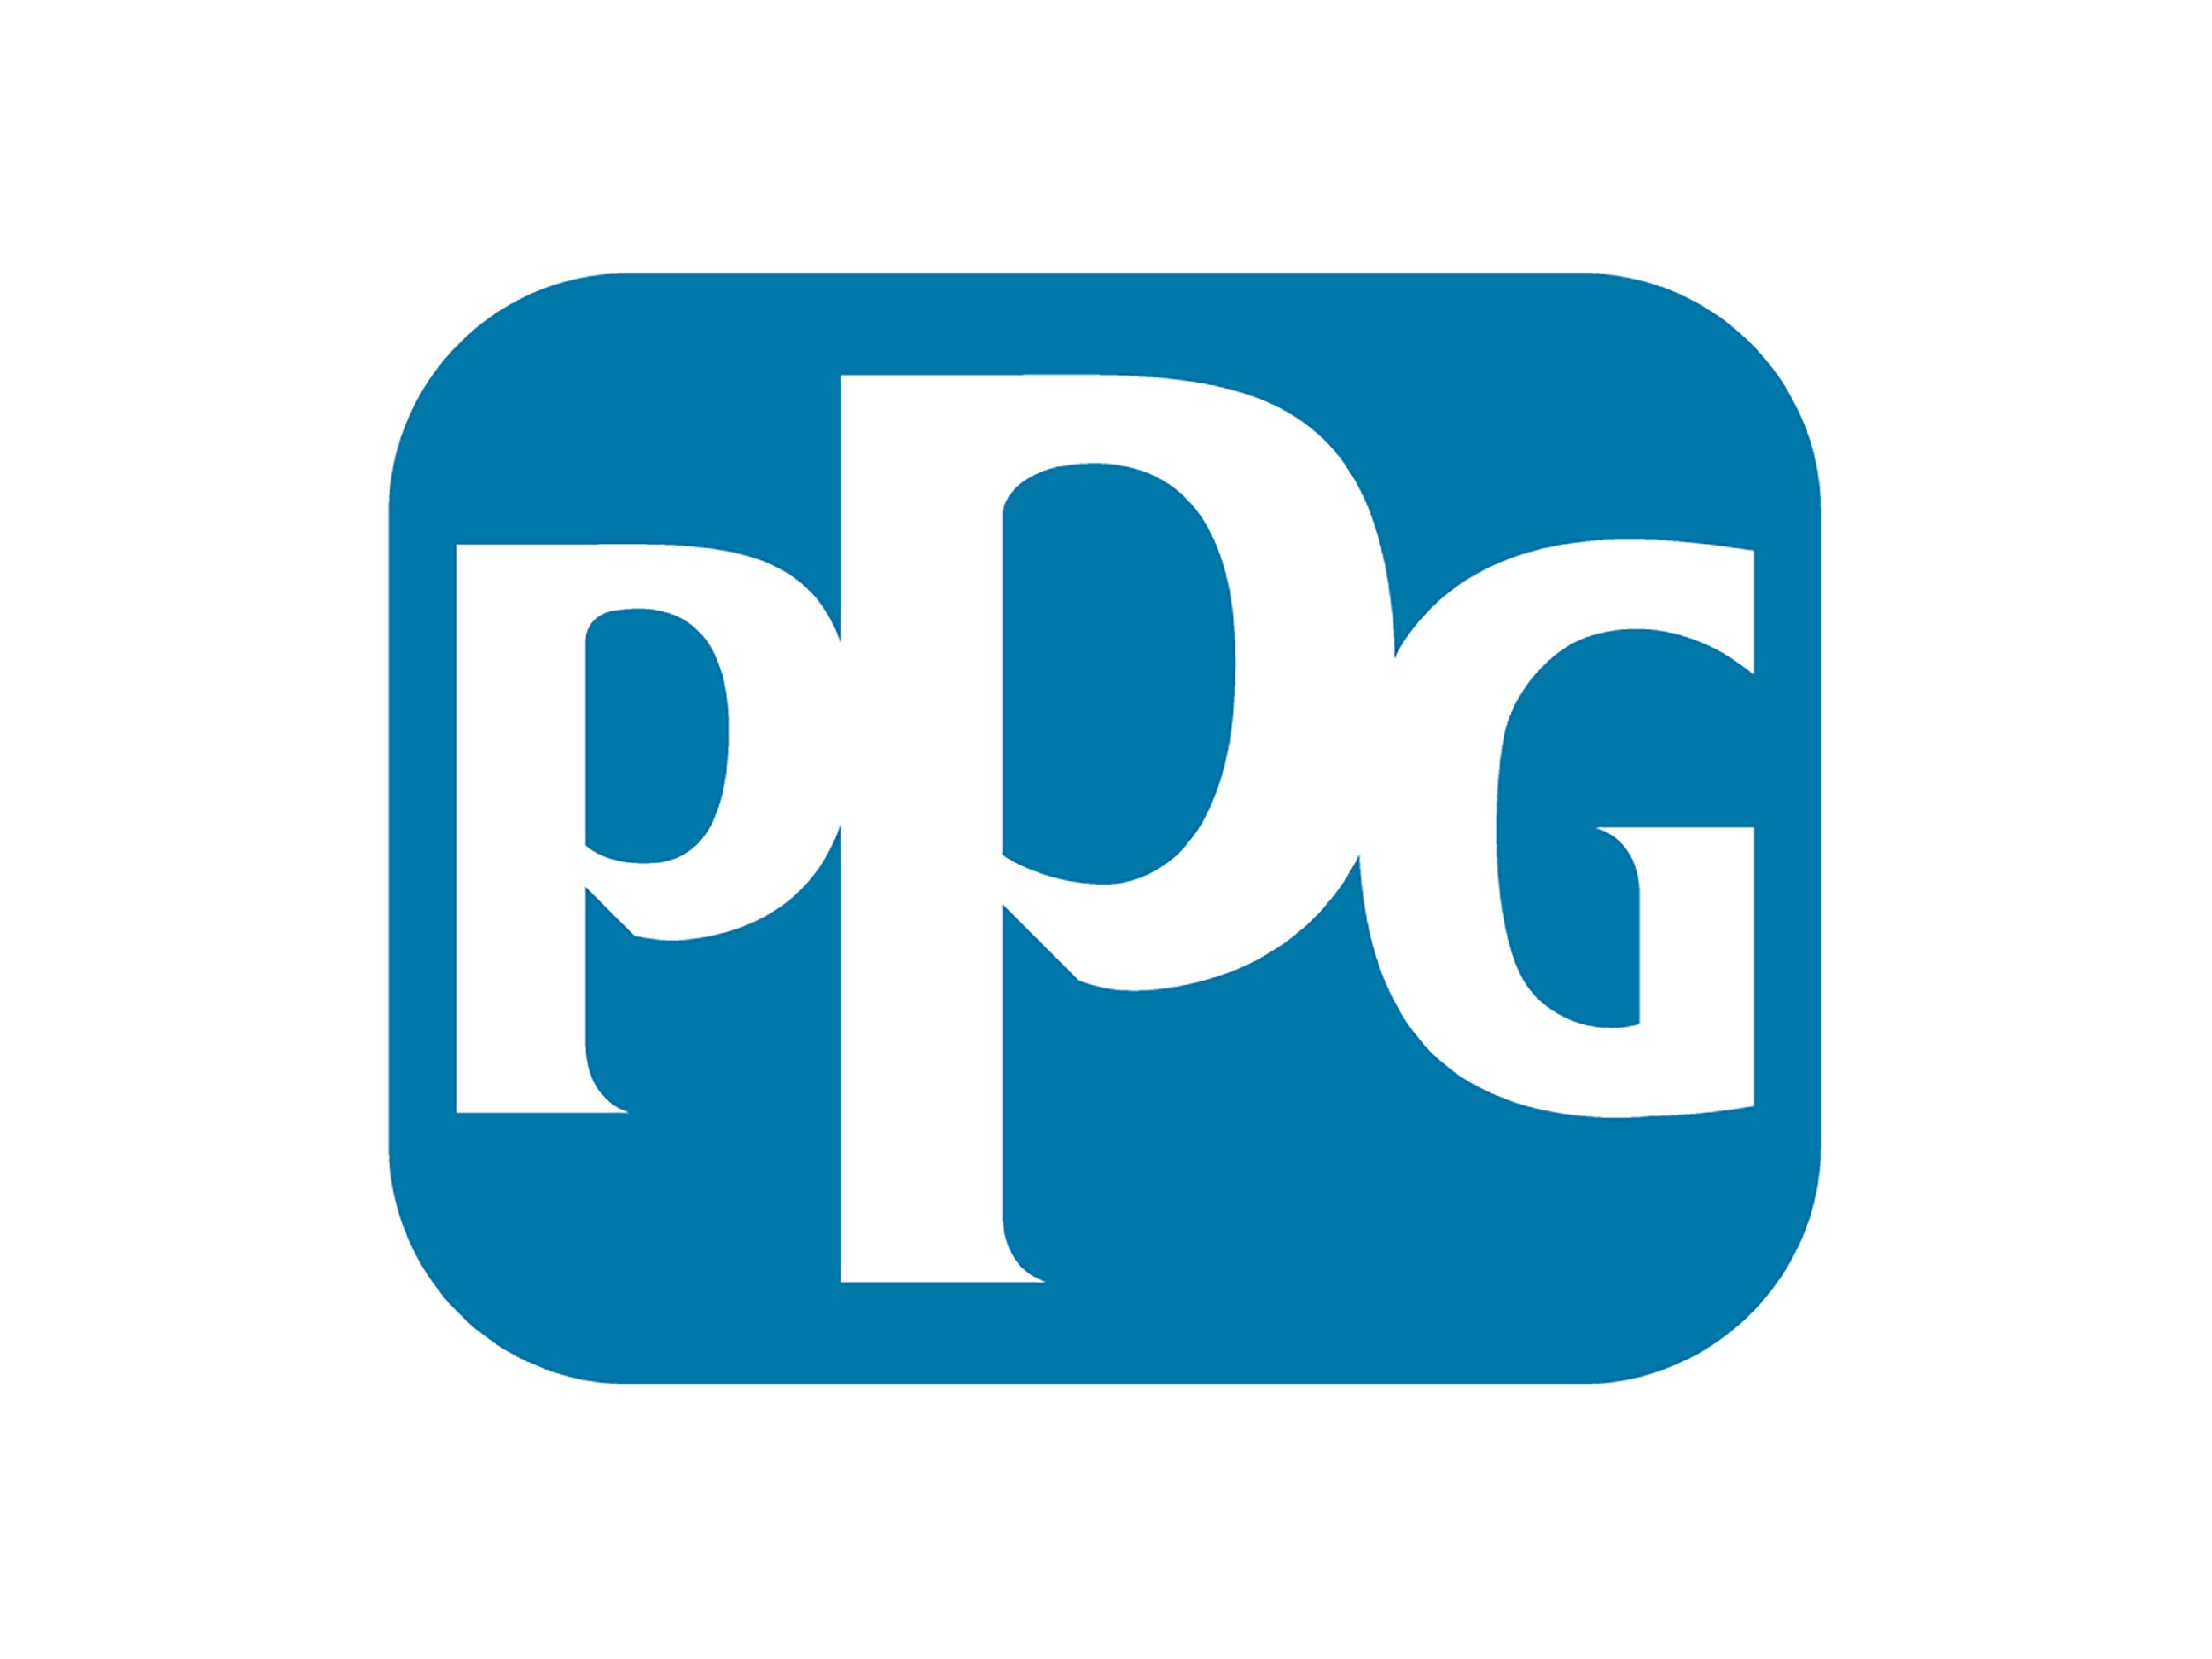 PPG Industries, Inc